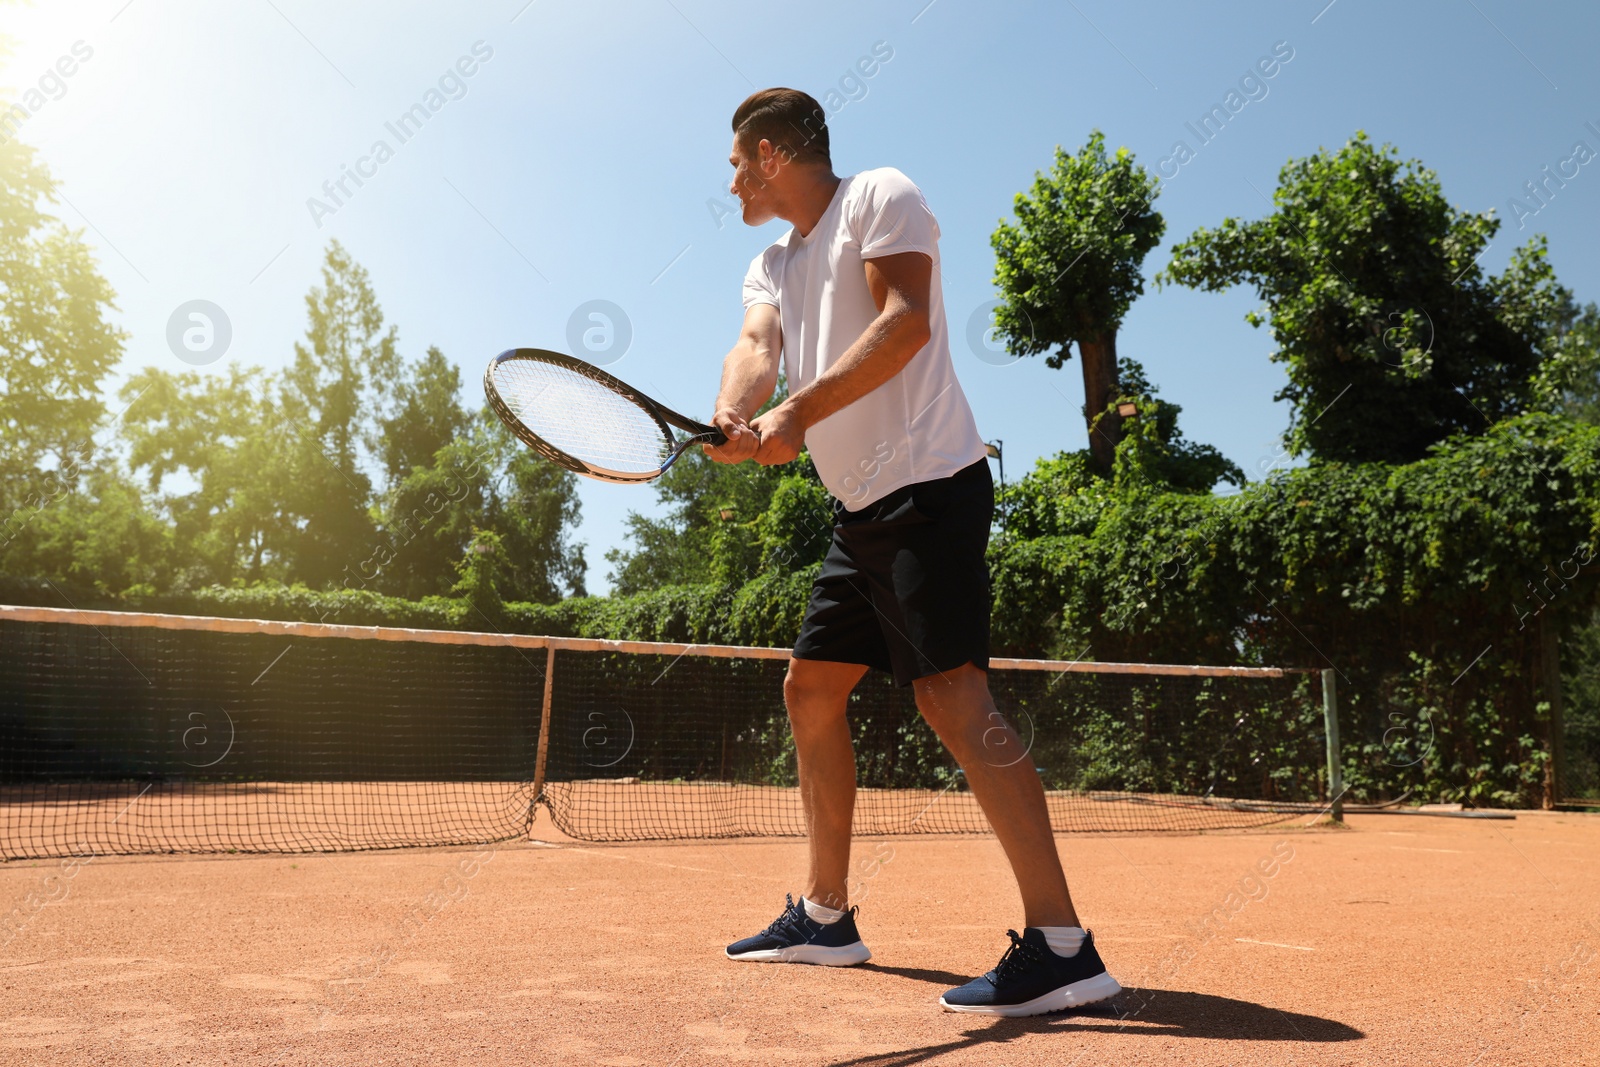 Photo of Man playing tennis on court during sunny day